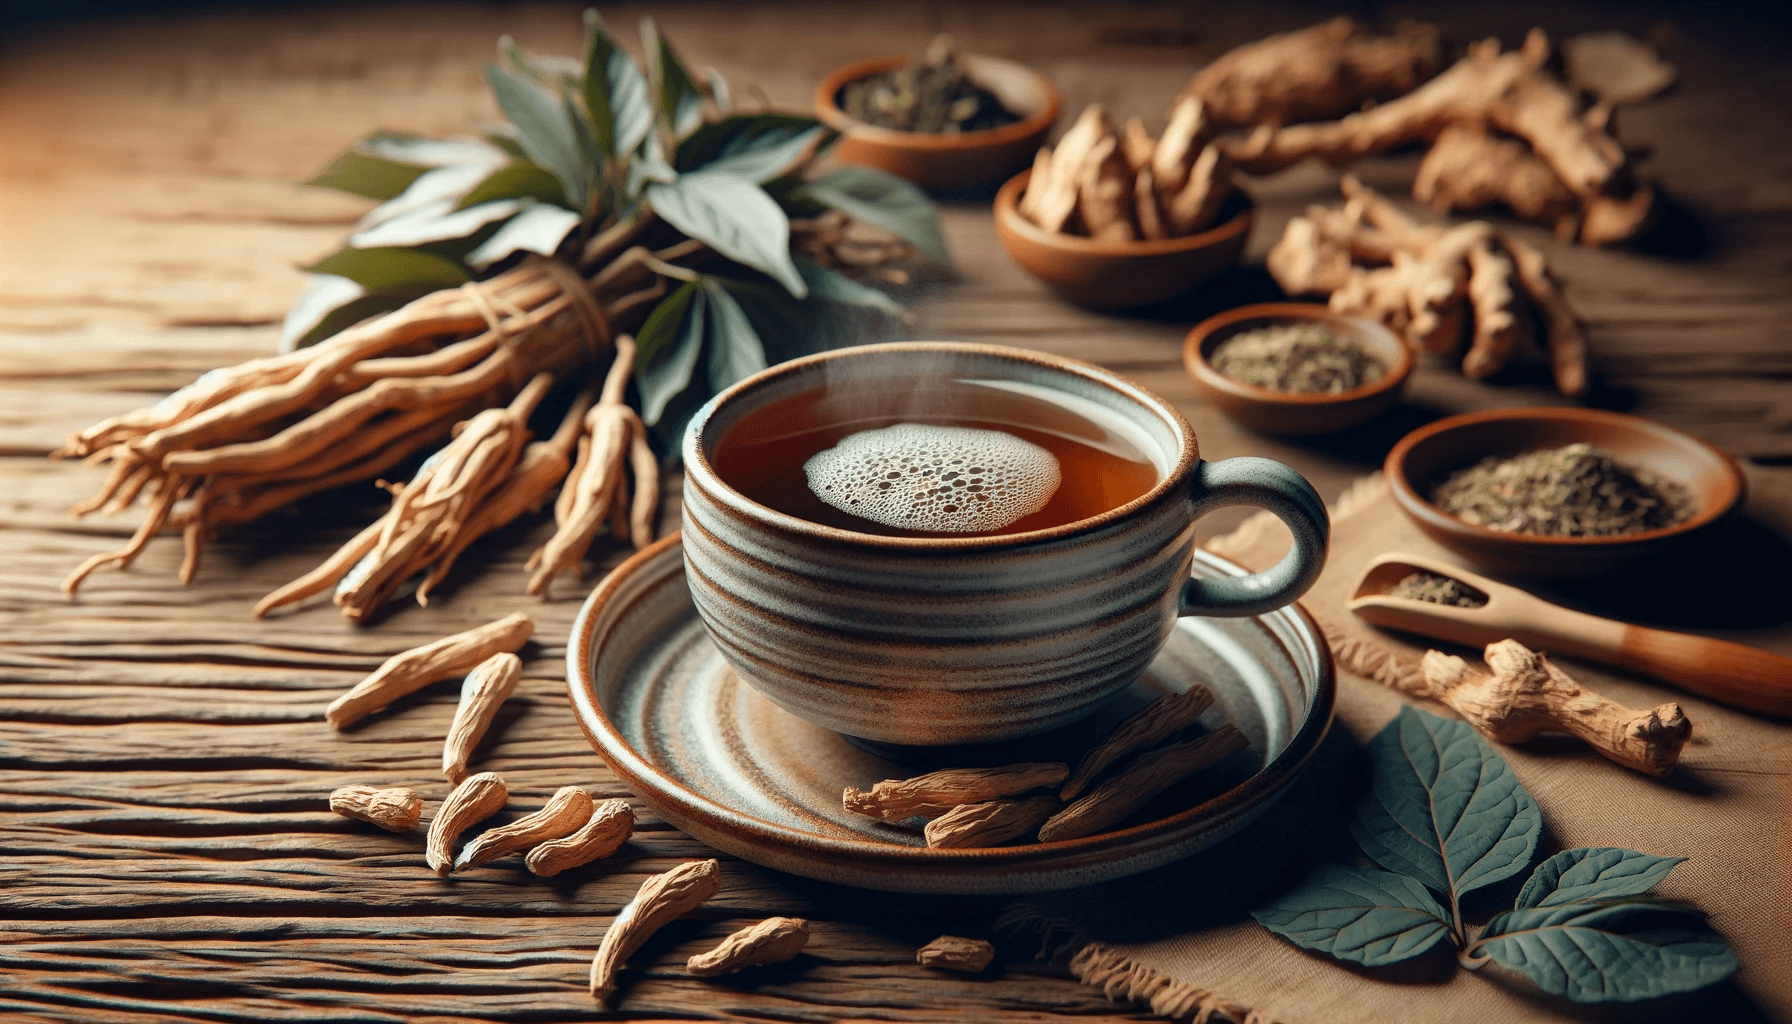 Ashwagandha tea in a ceramic cup on a wooden table